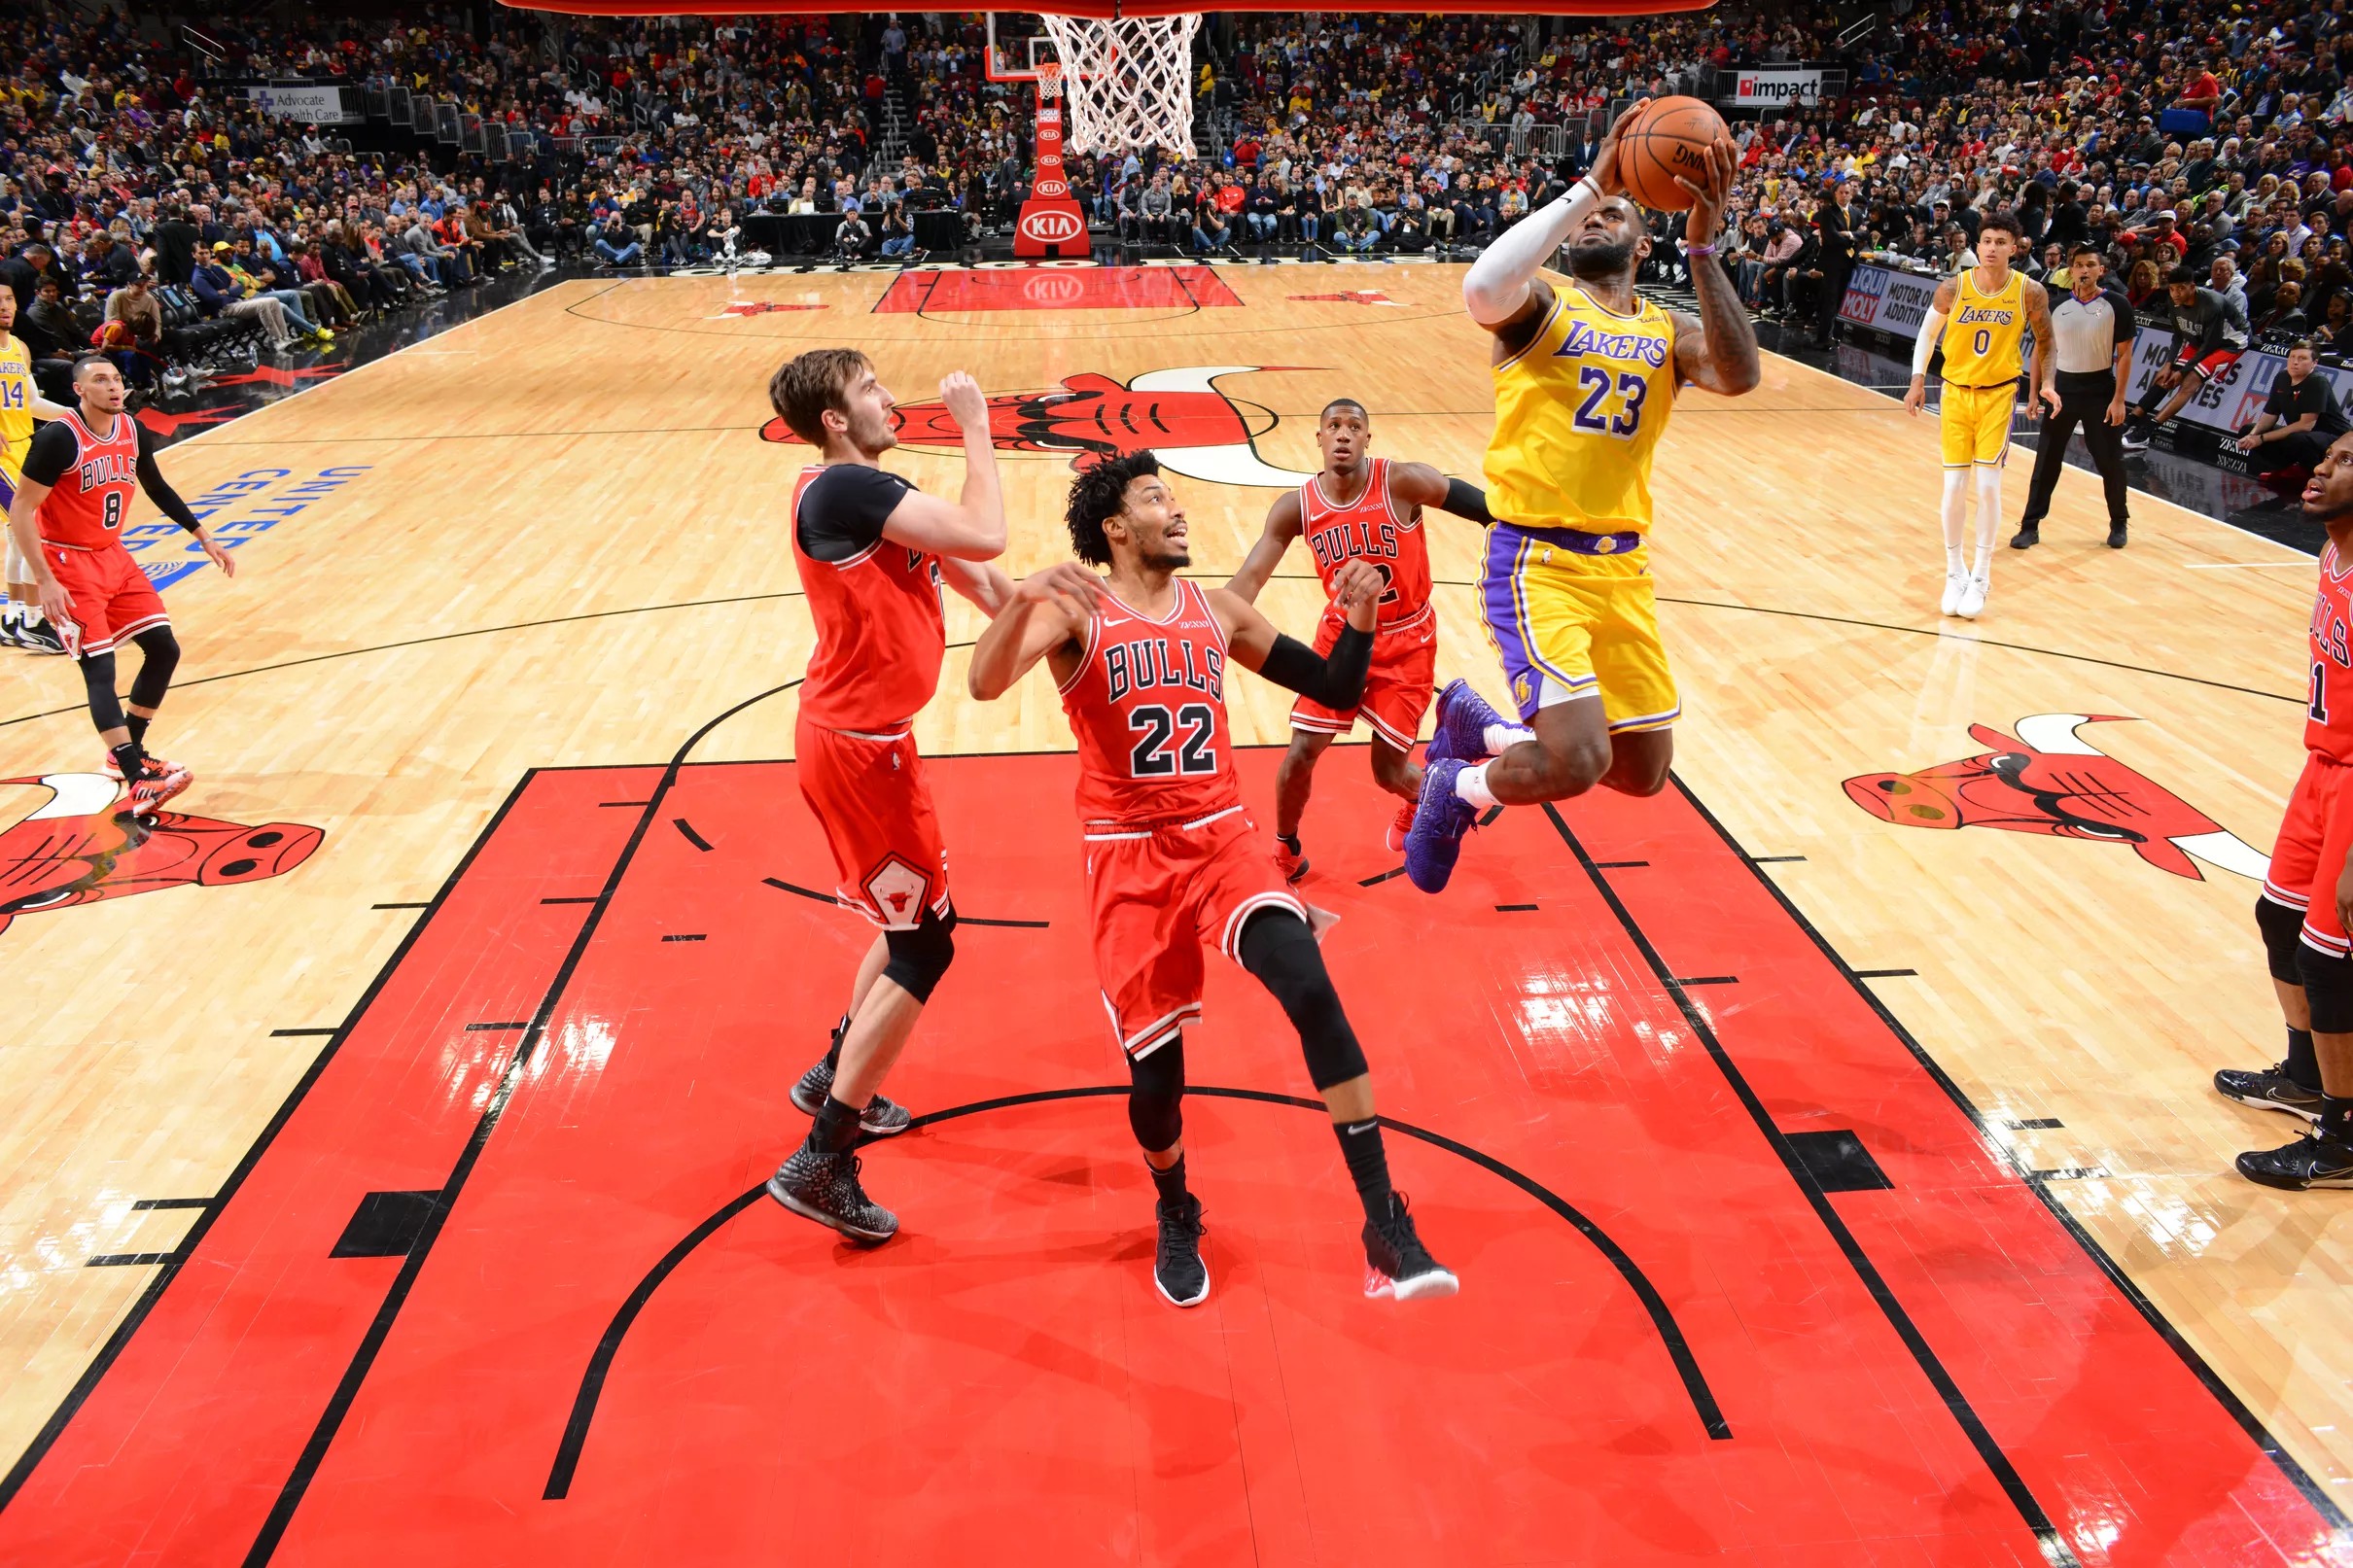 Bulls vs. Lakers final score Chicago outscored 3819 in 4th quarter in